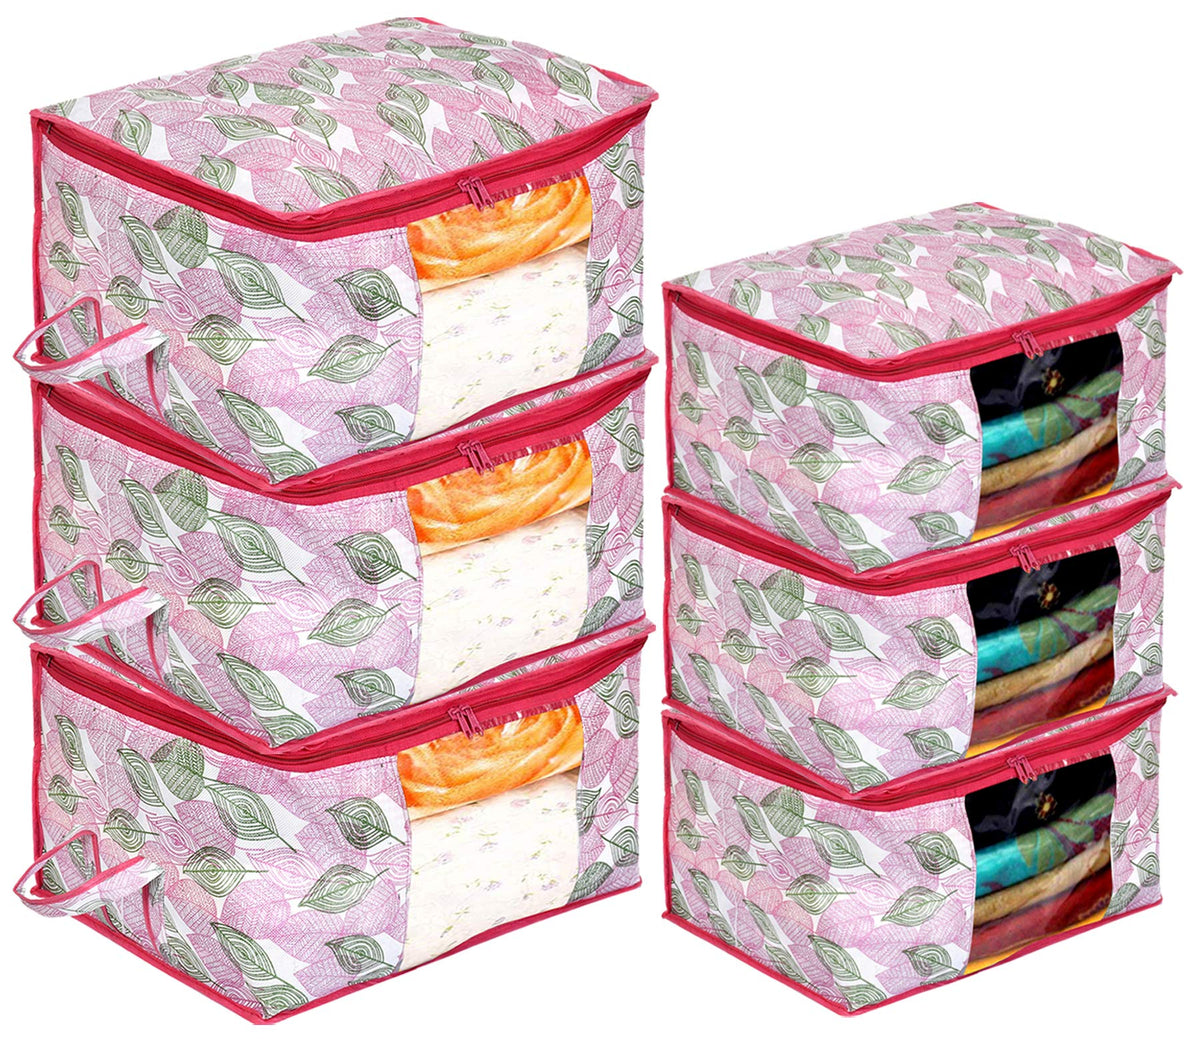 Kuber Industries Metalic Leafy Print 3 Piece Non Woven Saree Cover And 3 Pieces Underbed Storage Bag, Storage Organiser, Blanket Cover (Set of 6,Pink)-KUBMART16692